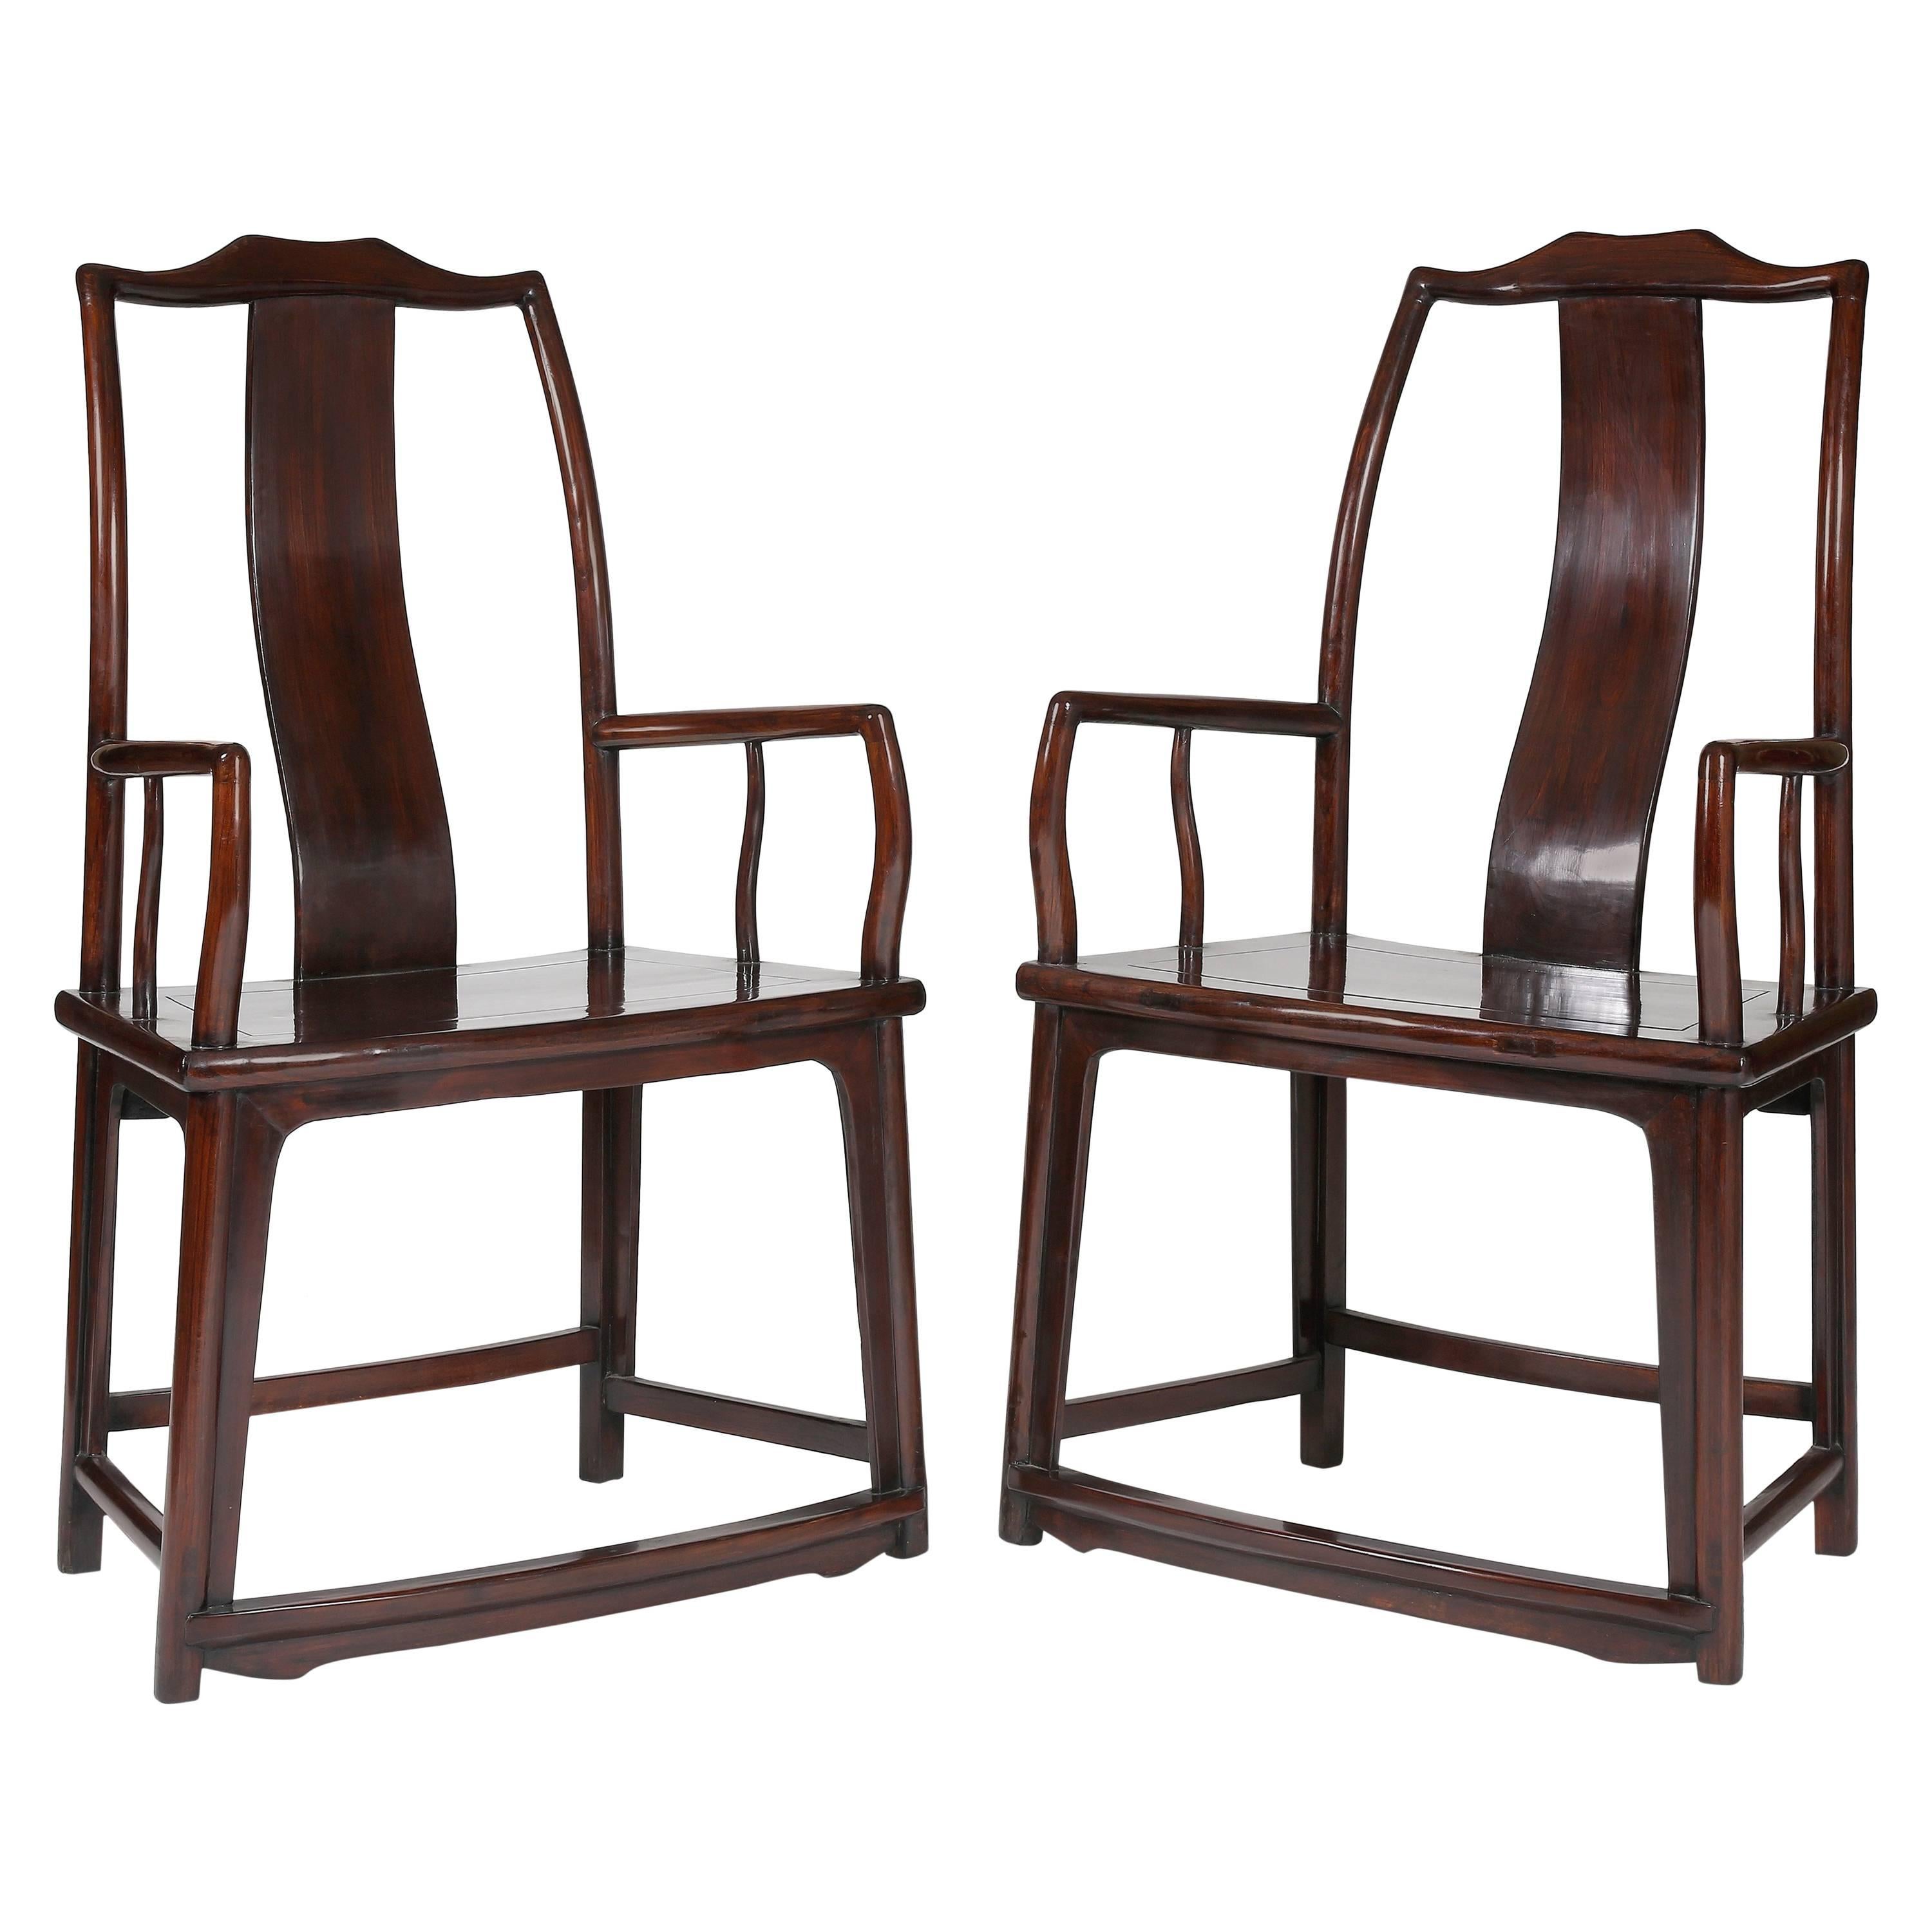 Pair of 19th Century Official's Hat Rectangular Back Armchairs, Fan Shaped Sea